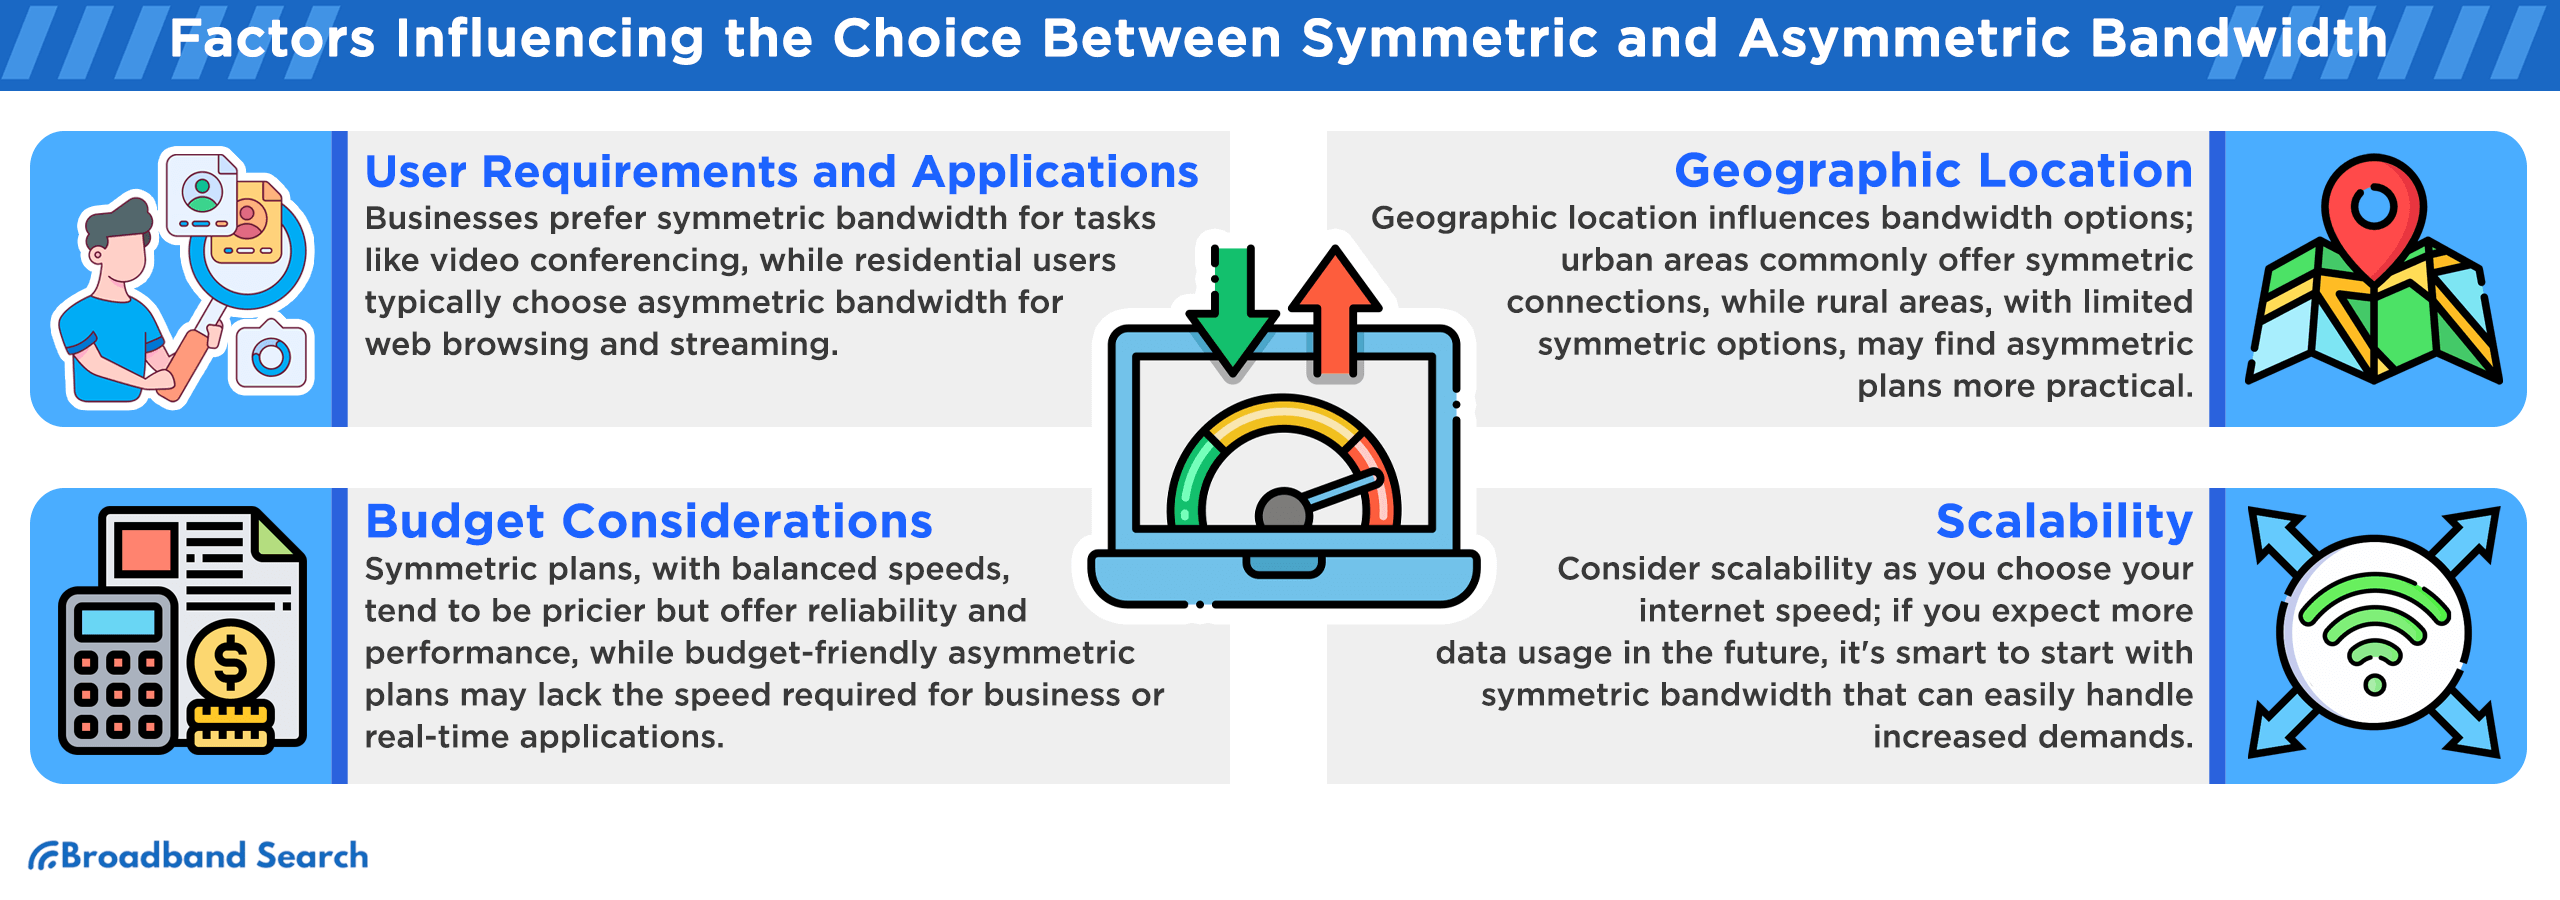 Factors influencing the choice between symmetric and asymmetric bandwidth